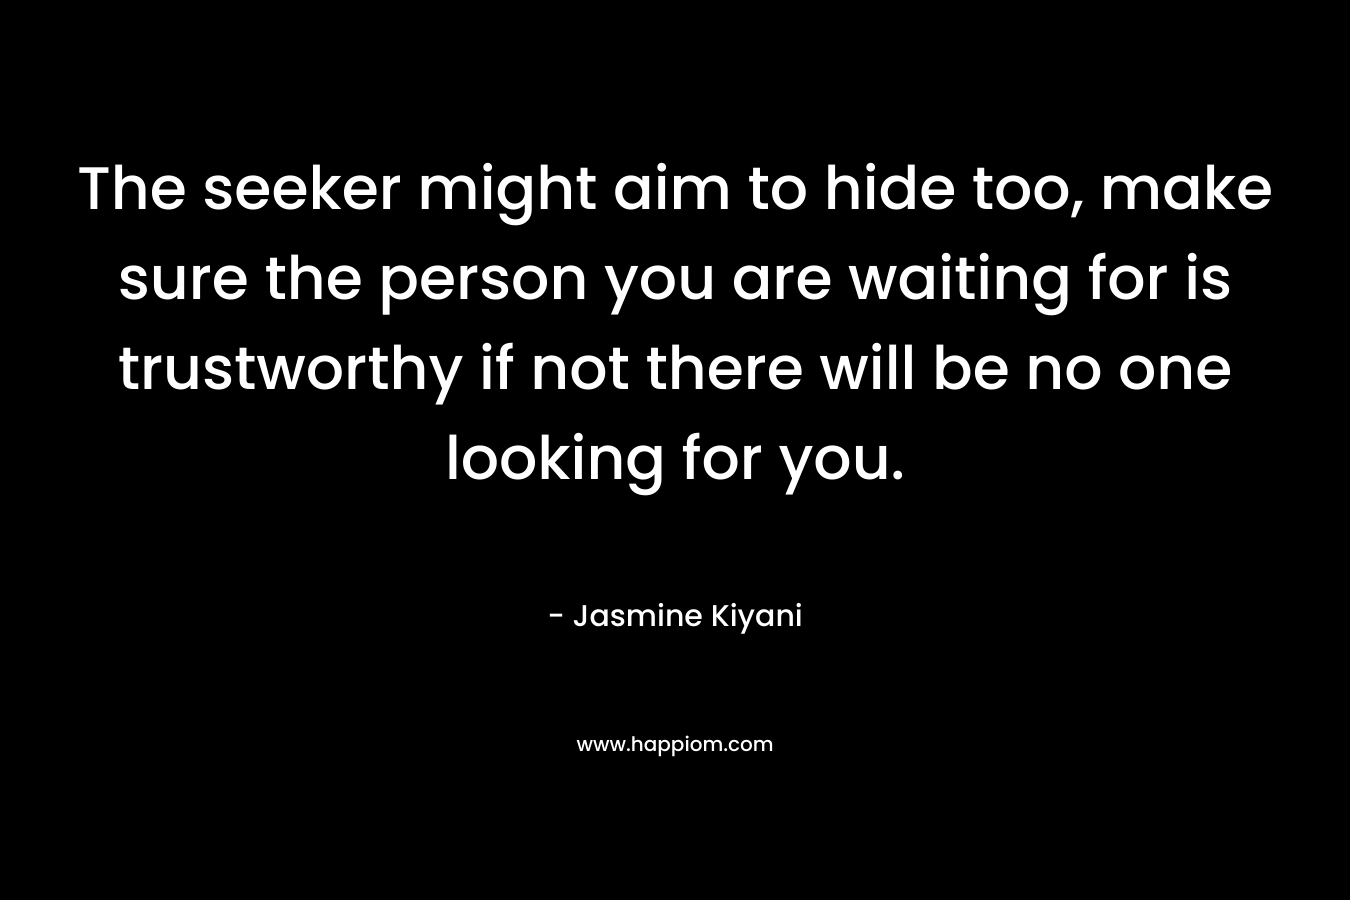 The seeker might aim to hide too, make sure the person you are waiting for is trustworthy if not there will be no one looking for you.